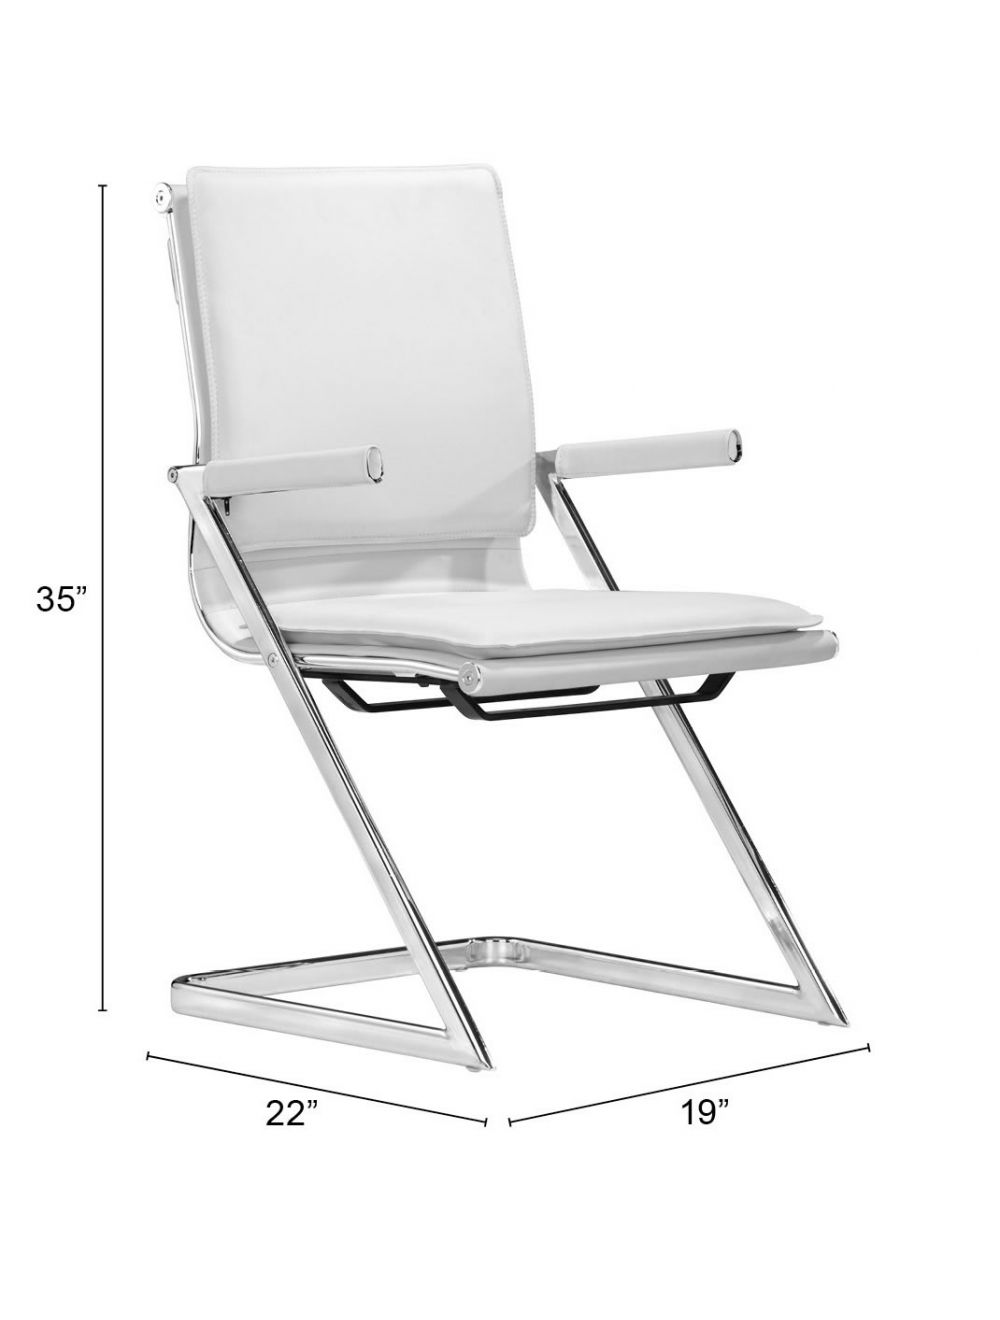 Lider Plus Conference Chair (Set of 2) White